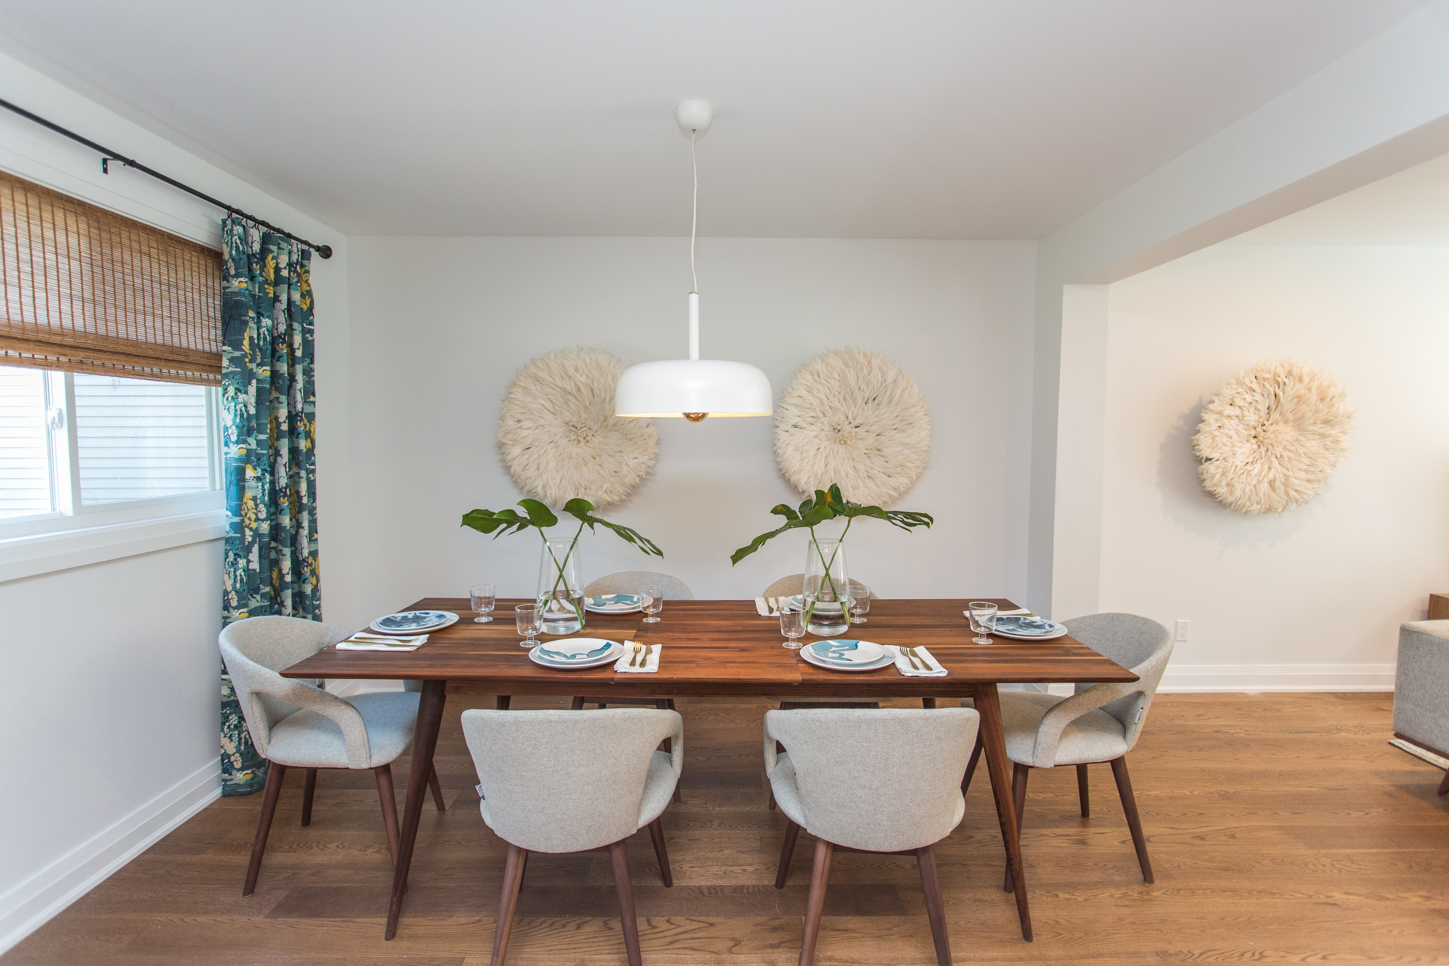 Modern dining space with wood table and mid-century modern chairs.